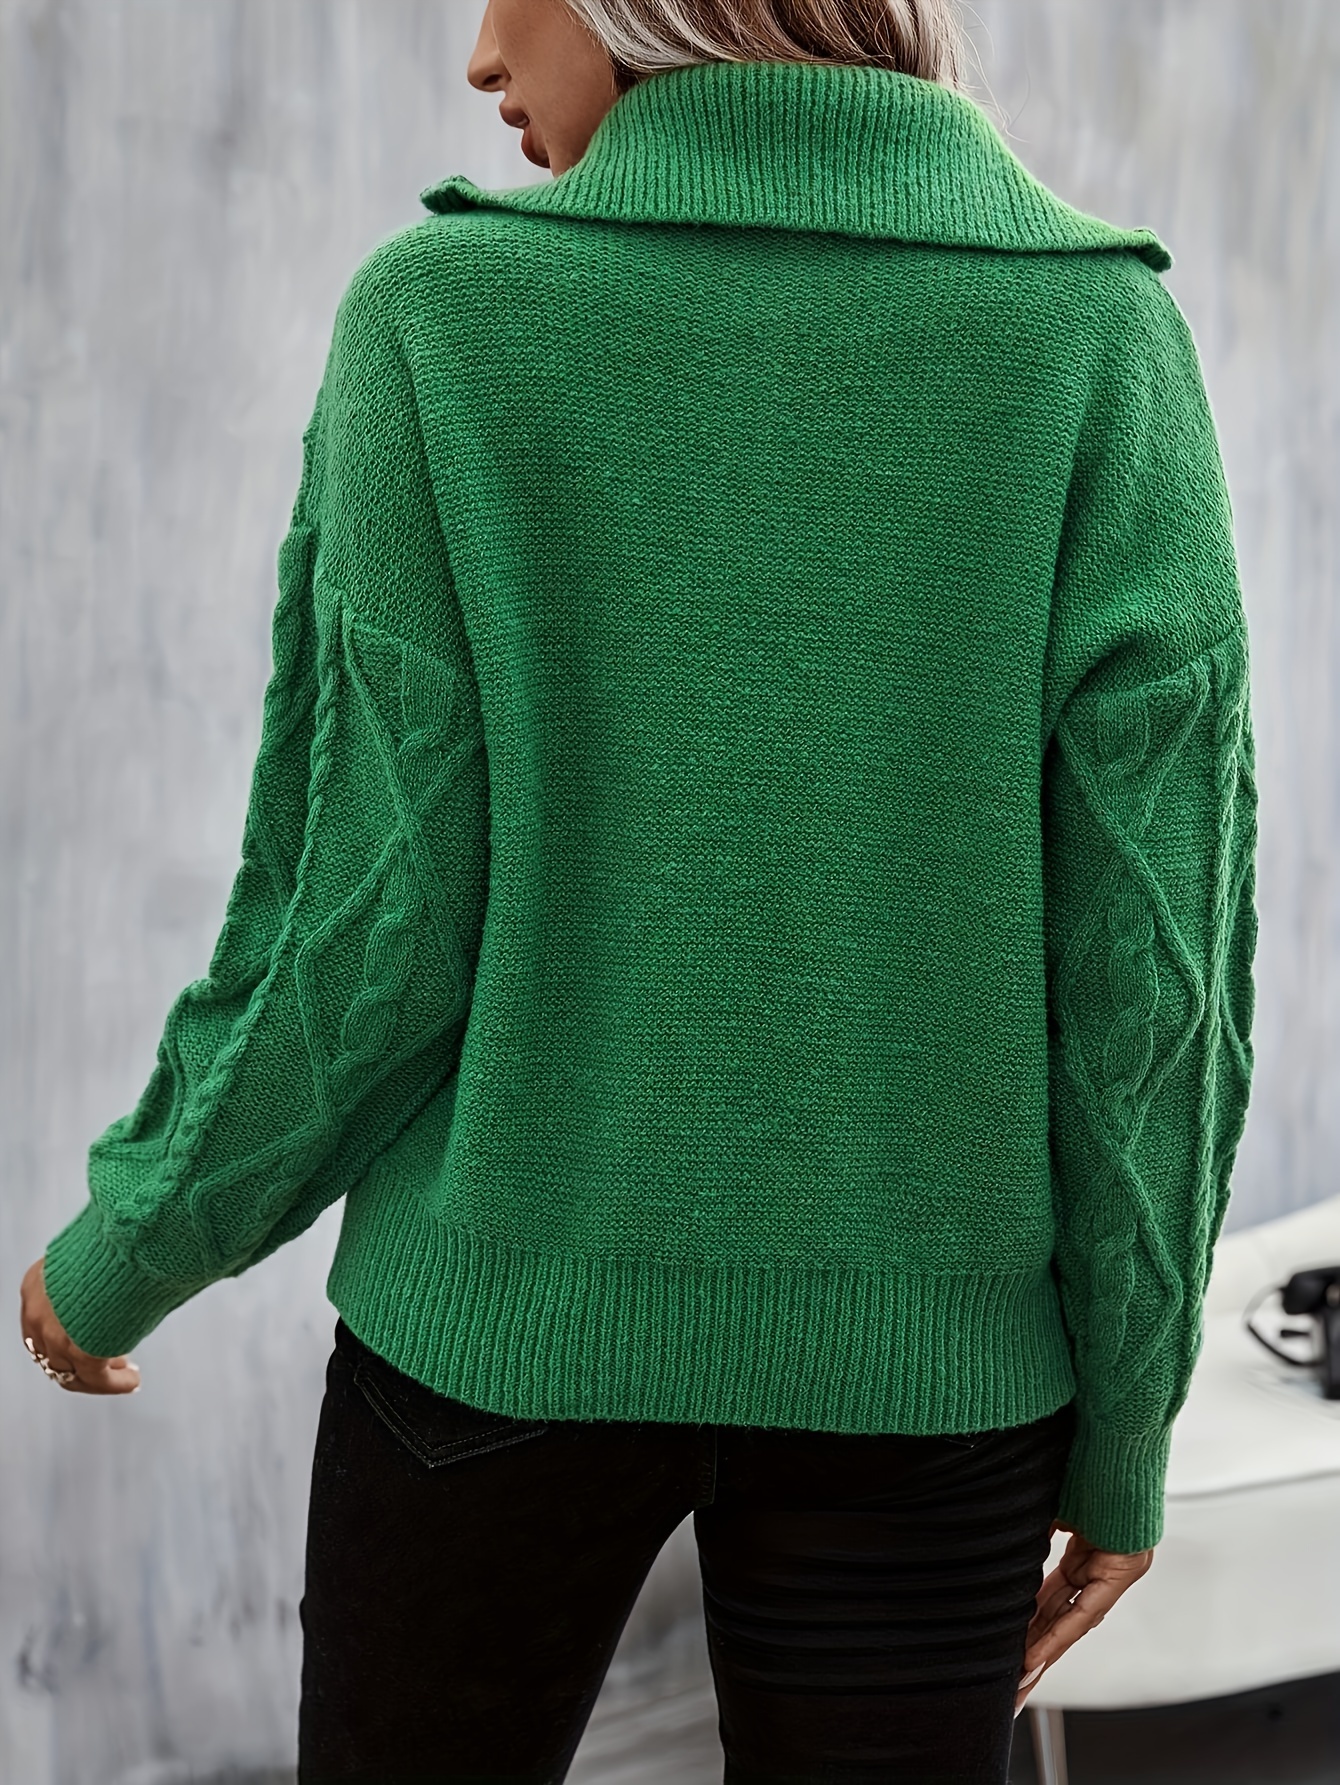 Juebong Women's Casual Dressy Casual Cable Knit Long Sleeve Turtleneck  Sweater,Green,M 